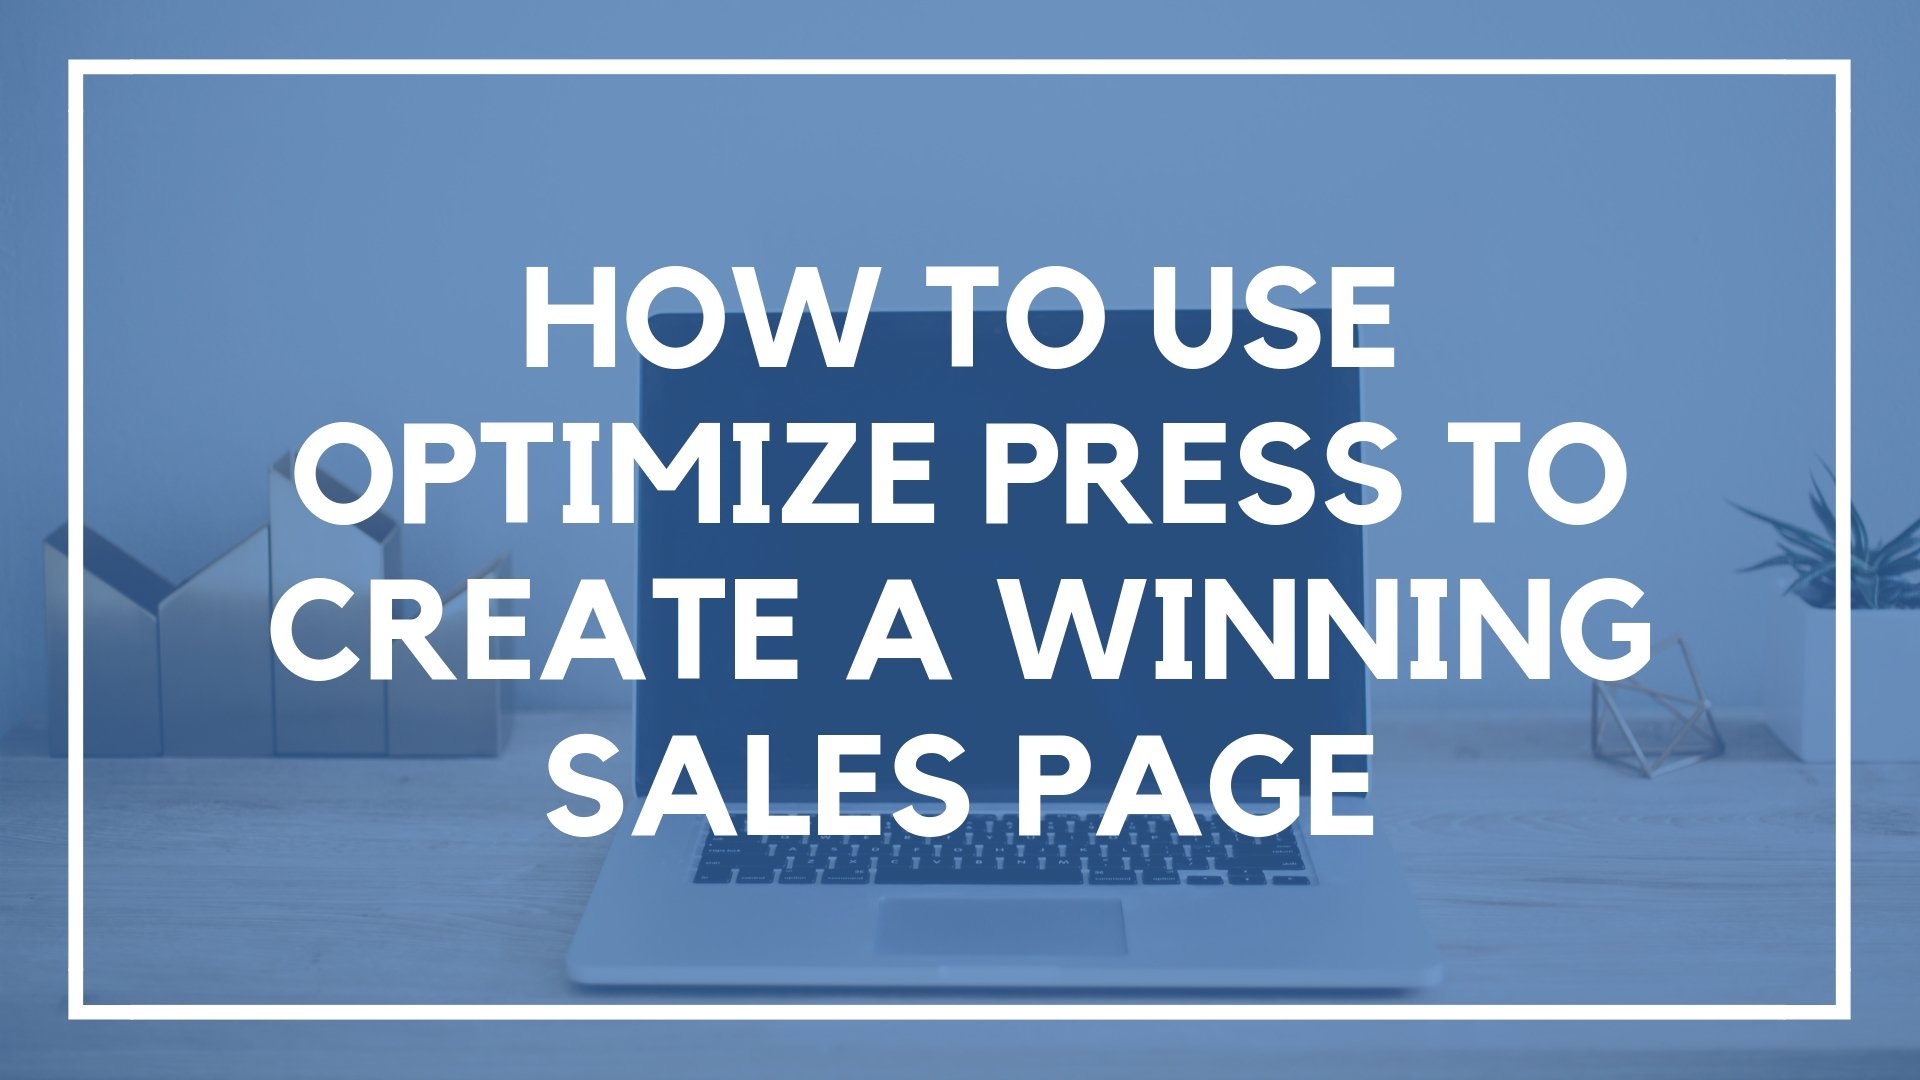 How to Use Optimize Press to Create a Winning Sales Page